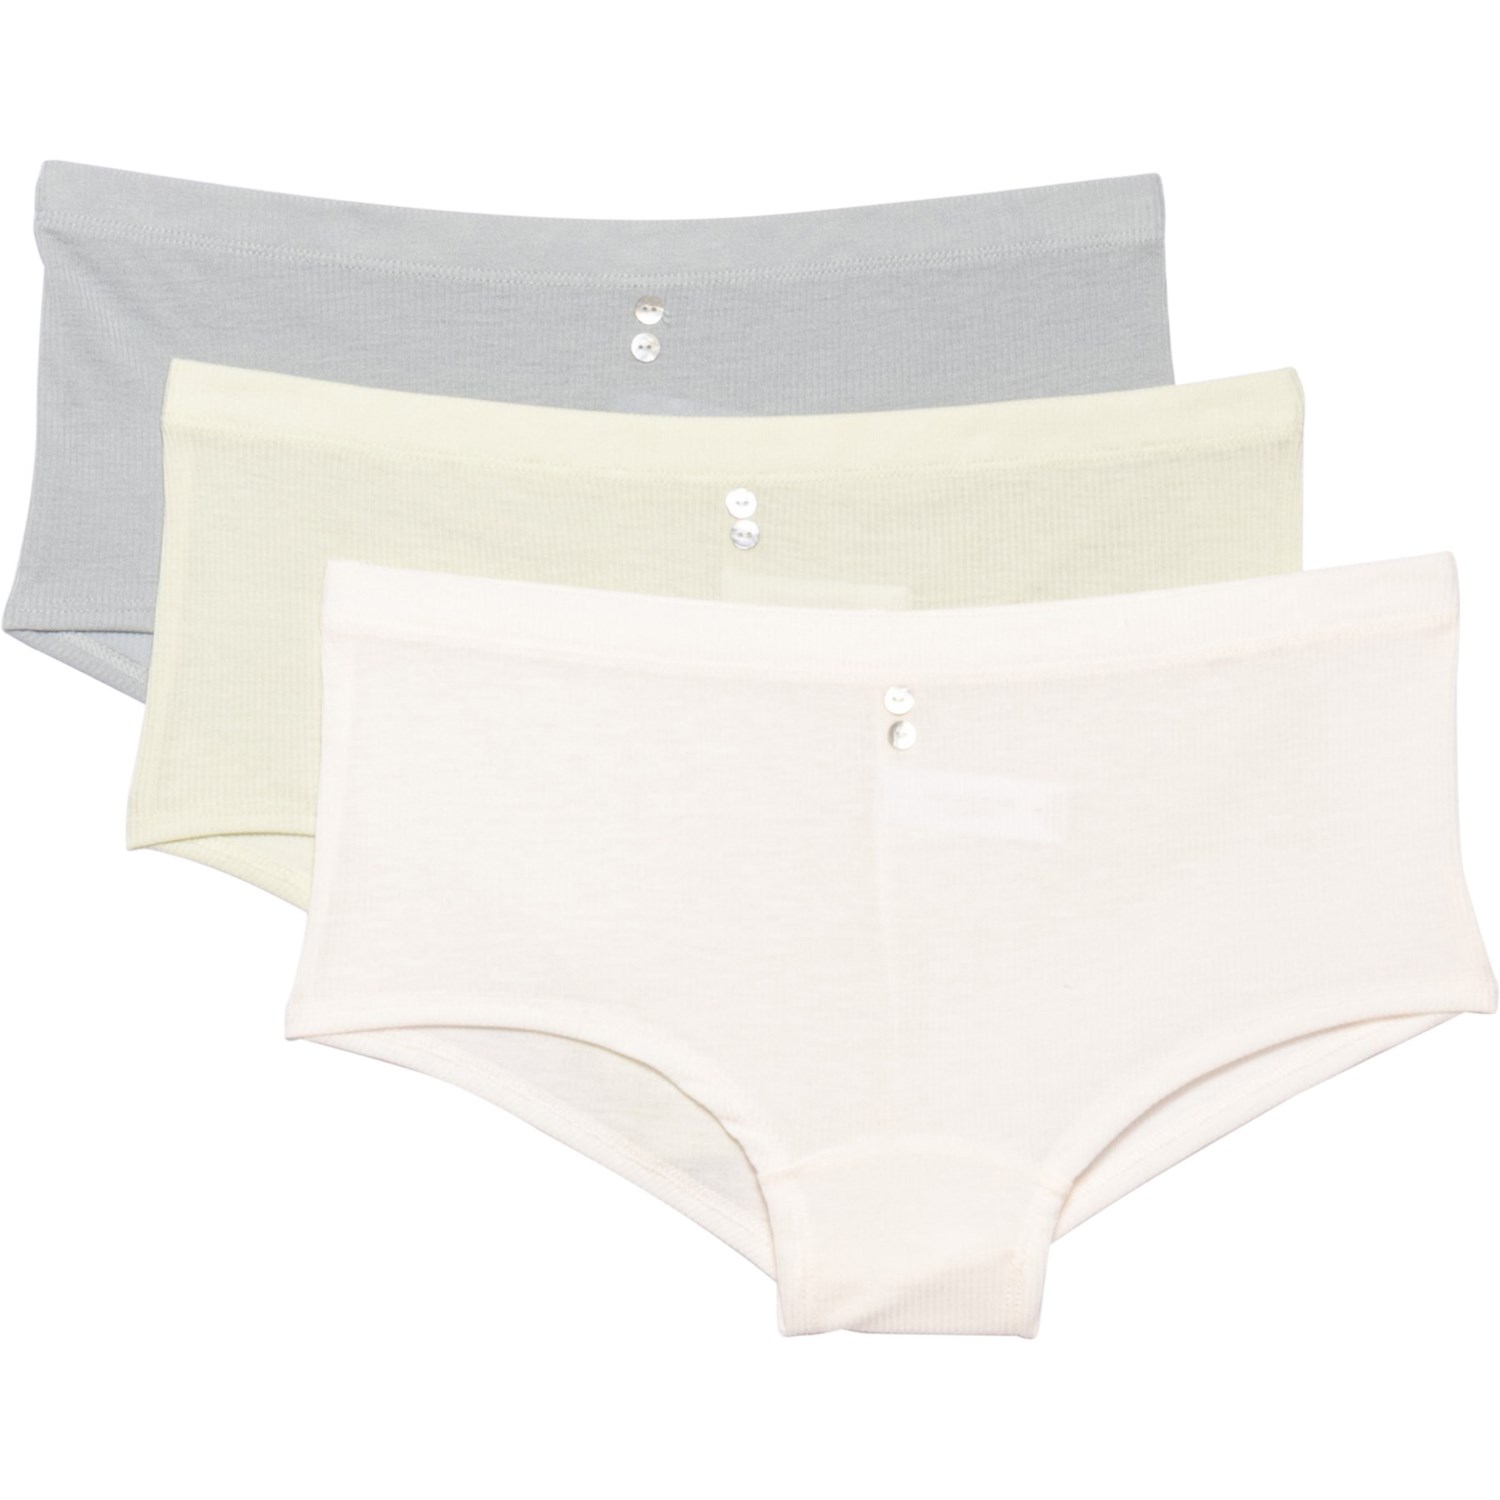 Danskin Ribbed Shell Button Panties (For Women) - Save 71%